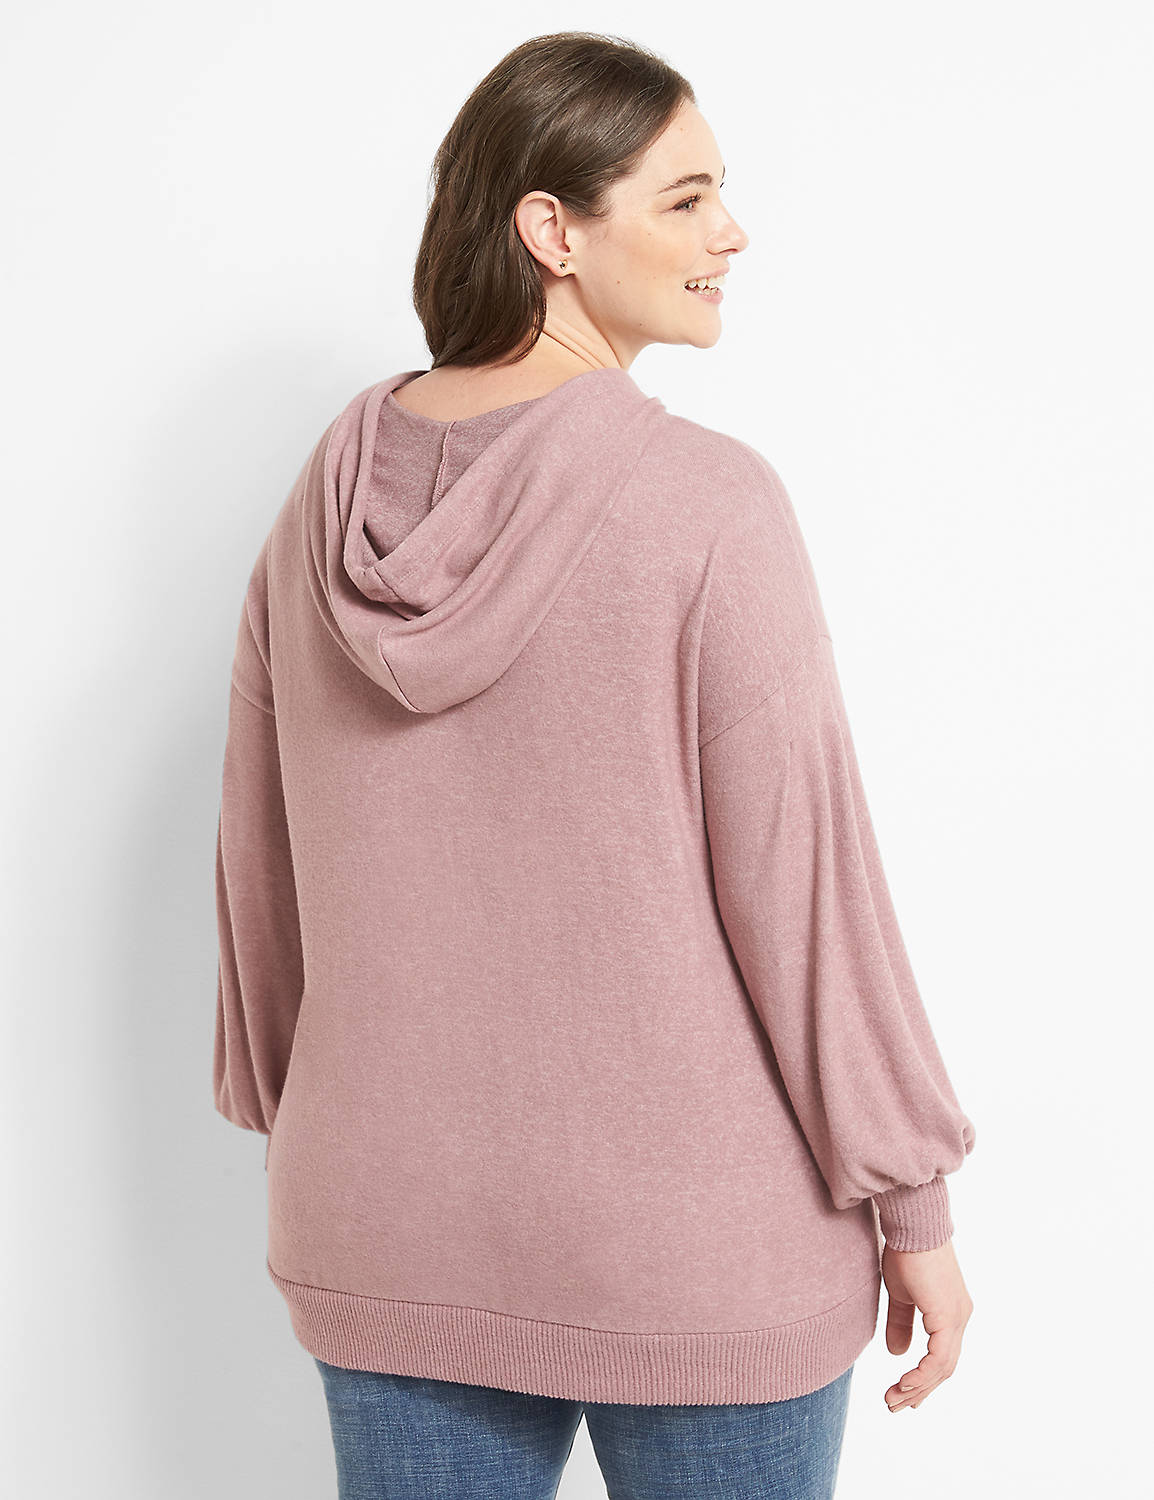 Hooded Knit Top With Pocket Product Image 2